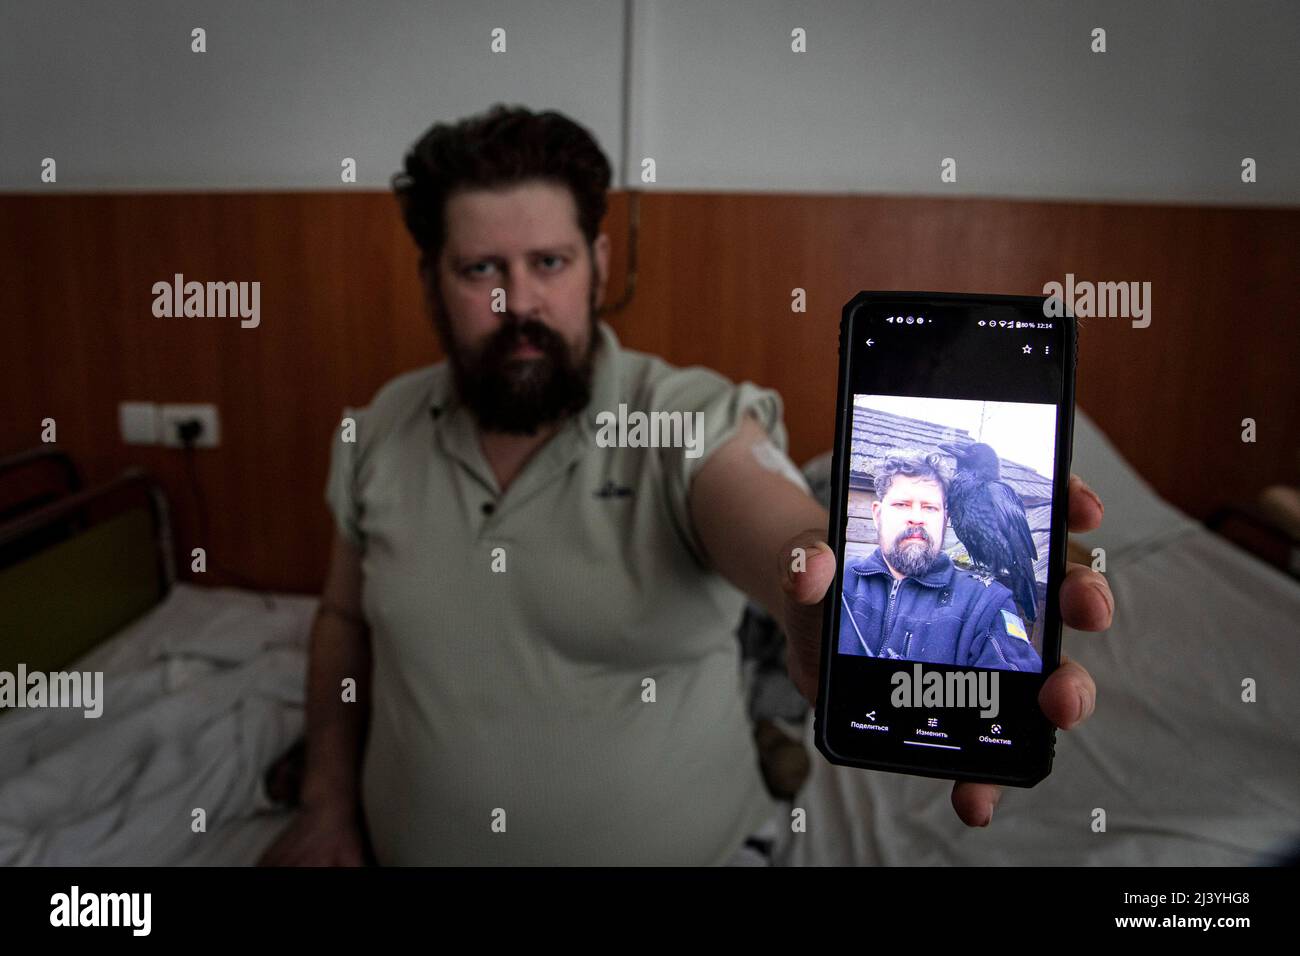 Andrey Bychenko (32), from Gosteml, Kyiv Oblast, injured with multiple bone fractures and severe blood loss caused by a Russian land mine on February 25 displays a smartphone screen with a photo of his friend who was killed by the Russian shelling. As the war continue to rage, numerous Ukrainian civilians were injured and killed under crossfire and the Russian offensive, and hospitals in Kyiv are now stocked with survivors under medical treatment. According to the United Nations, until March 23, over 977 civilians were killed and 1,594 injured. Stock Photo